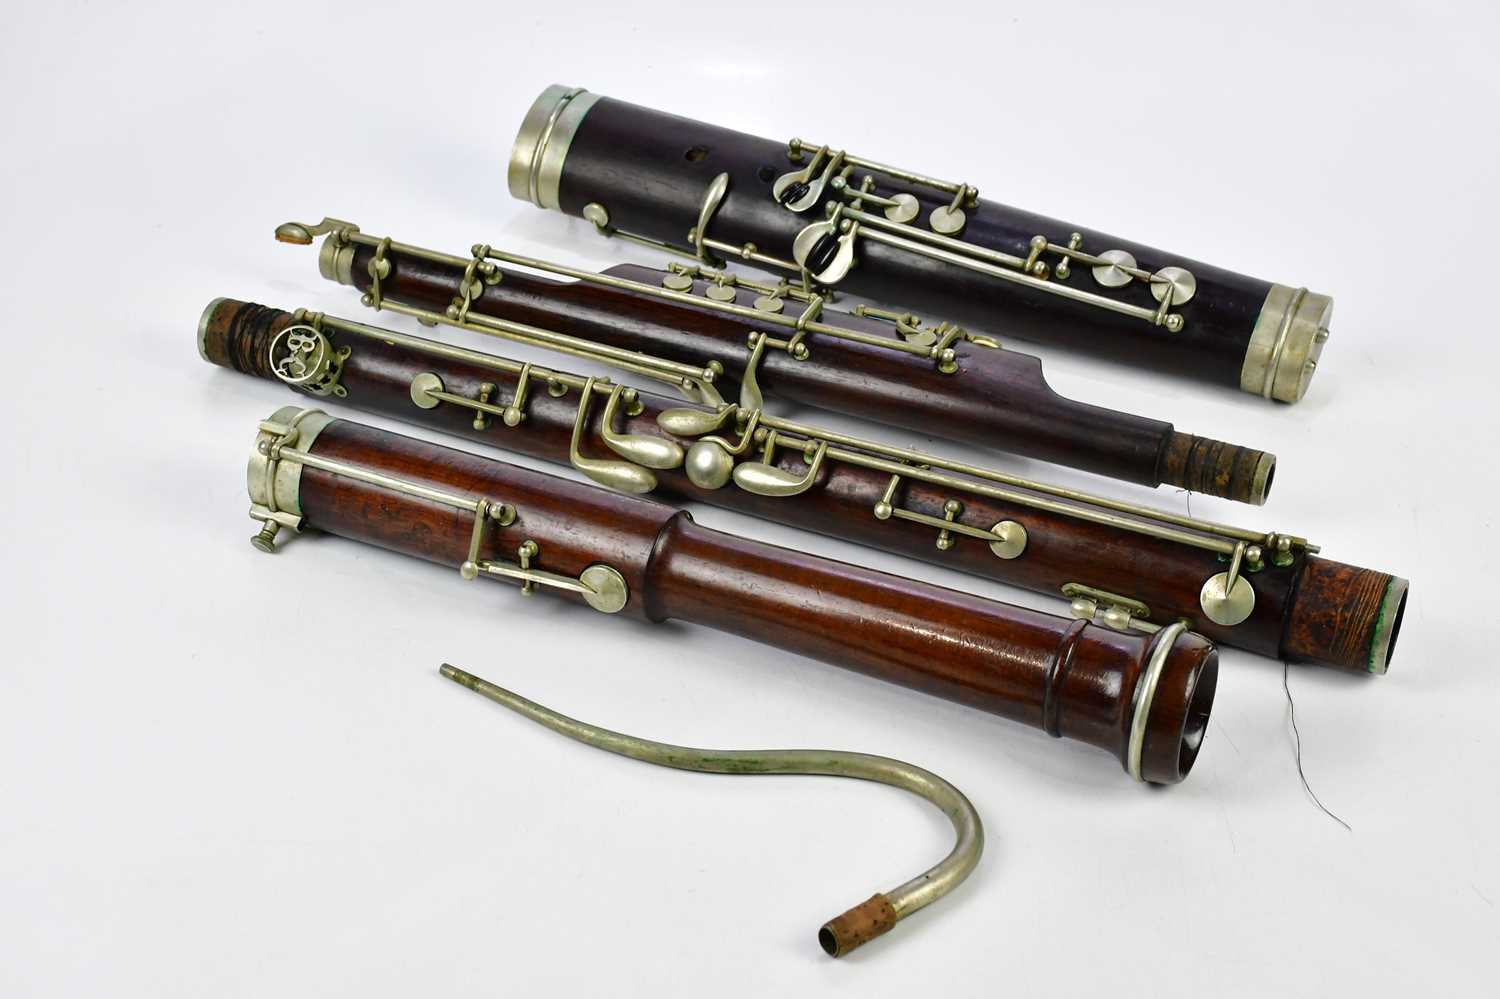 BUFFET CRAMPON, PARIS; a late 19th/early 20th century rosewood bassoon with nickel mounts, cased.